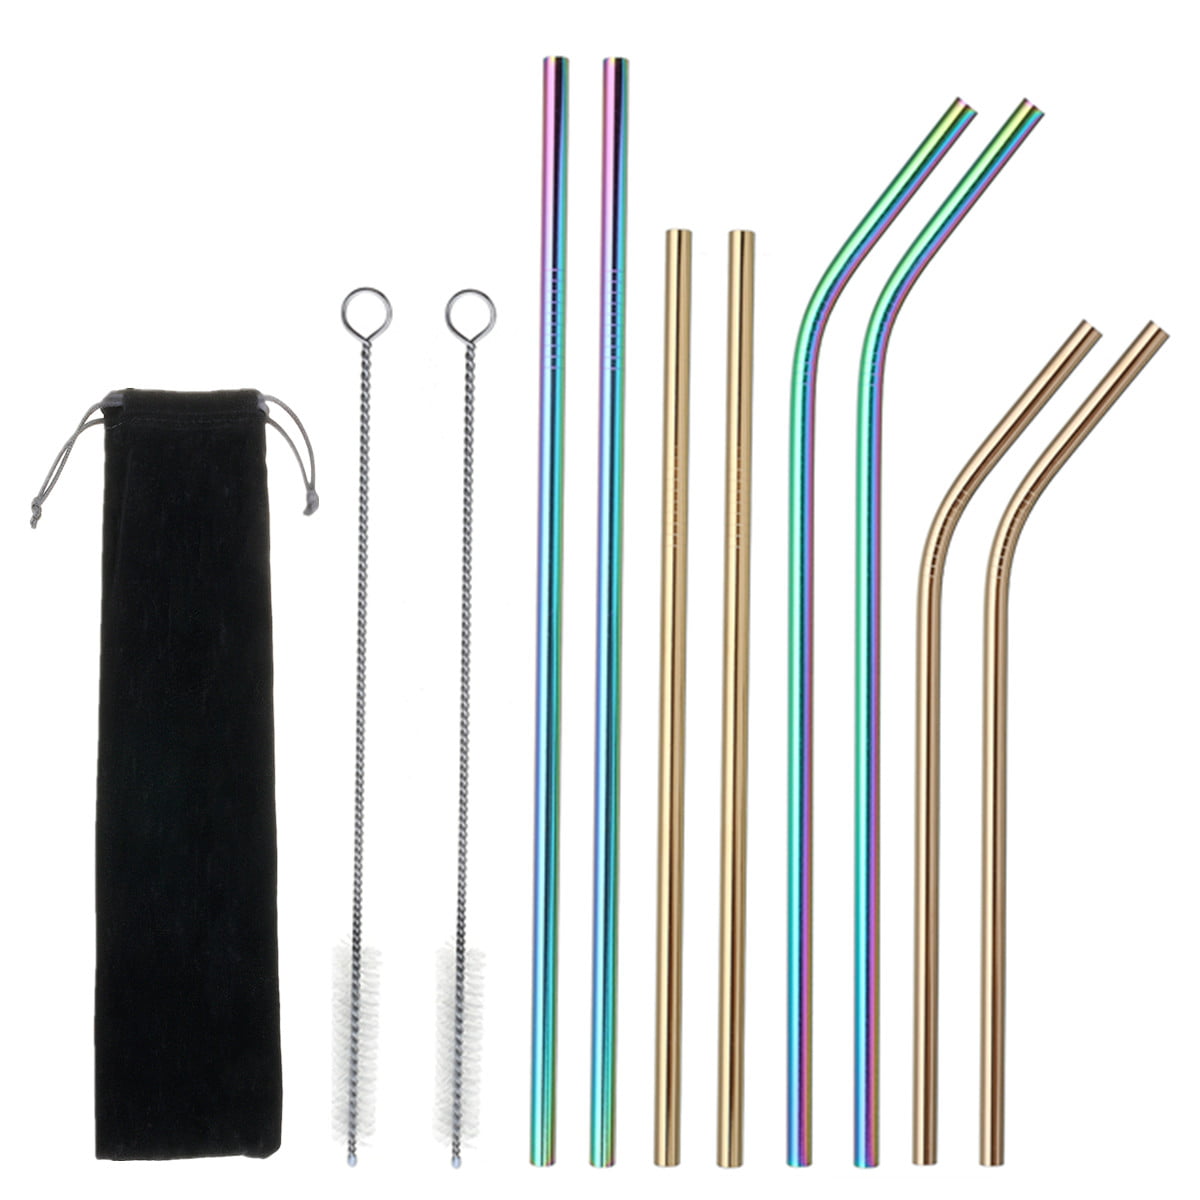 7 Color Avail Premium Stainless Steel Metal Drinking Straw inc Extra Wide Long